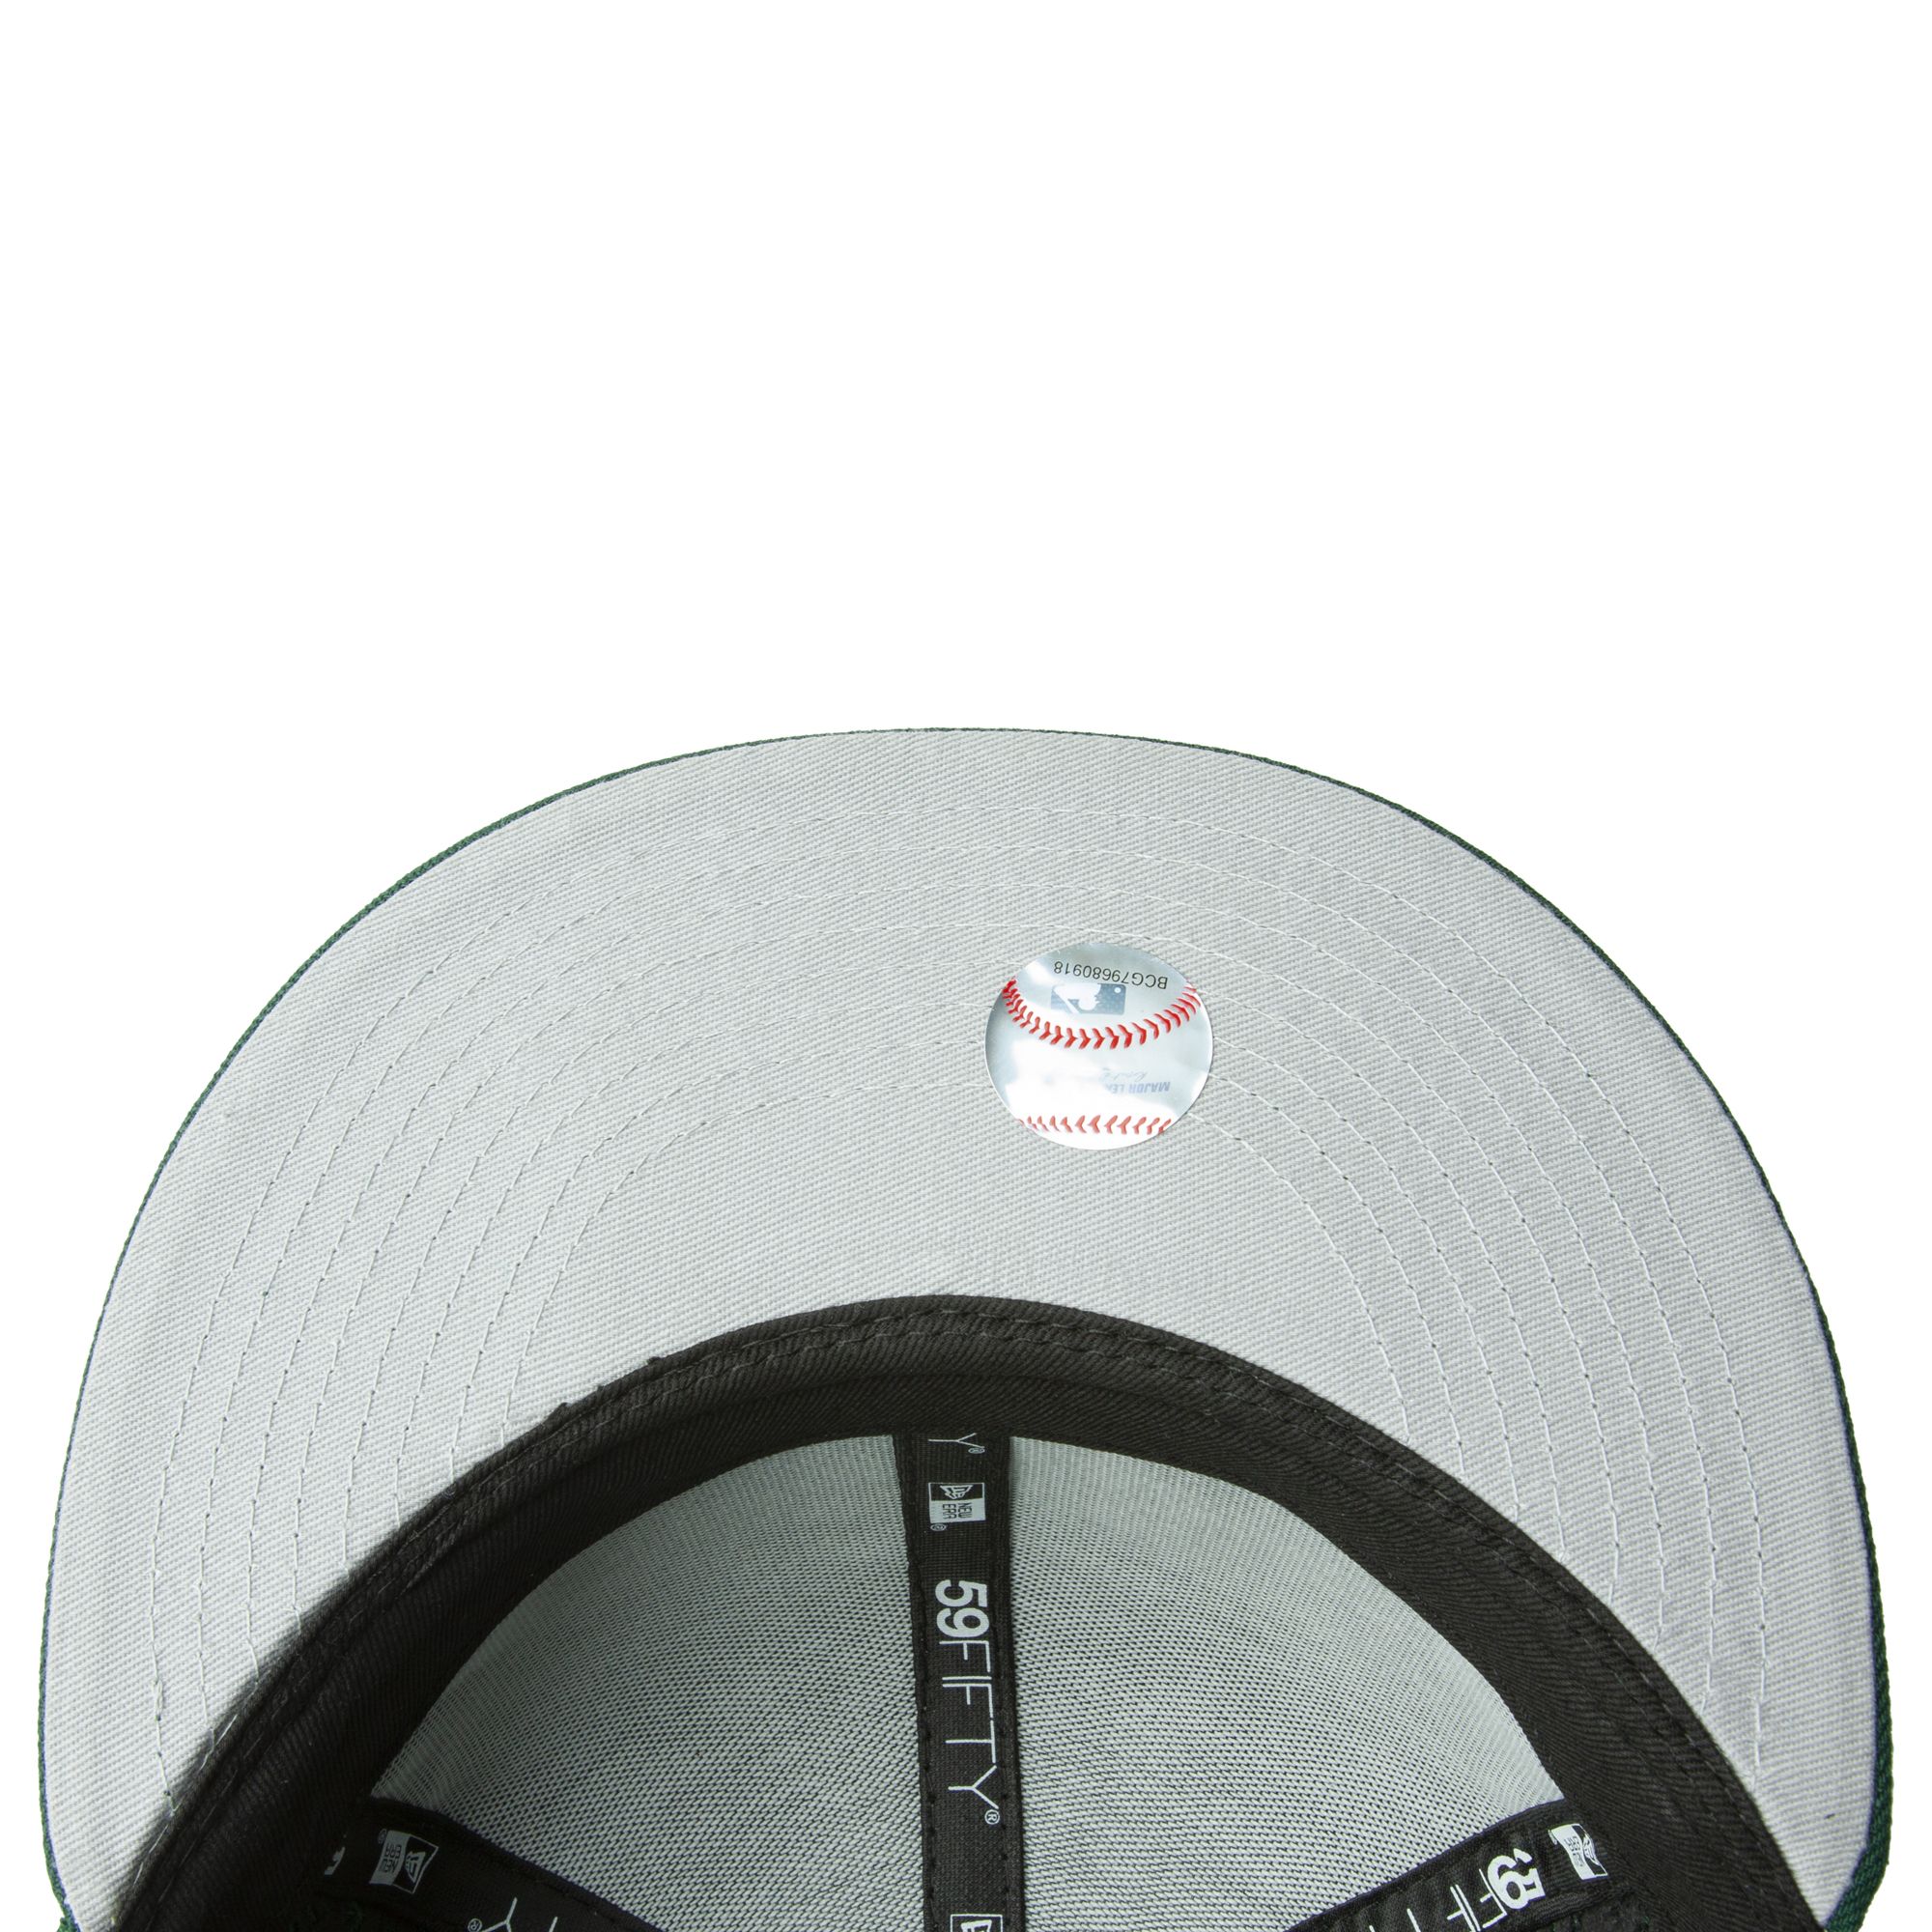 MLB Green Paisley Undervisor Collection  New era cap, Fitted hats, New era  hats